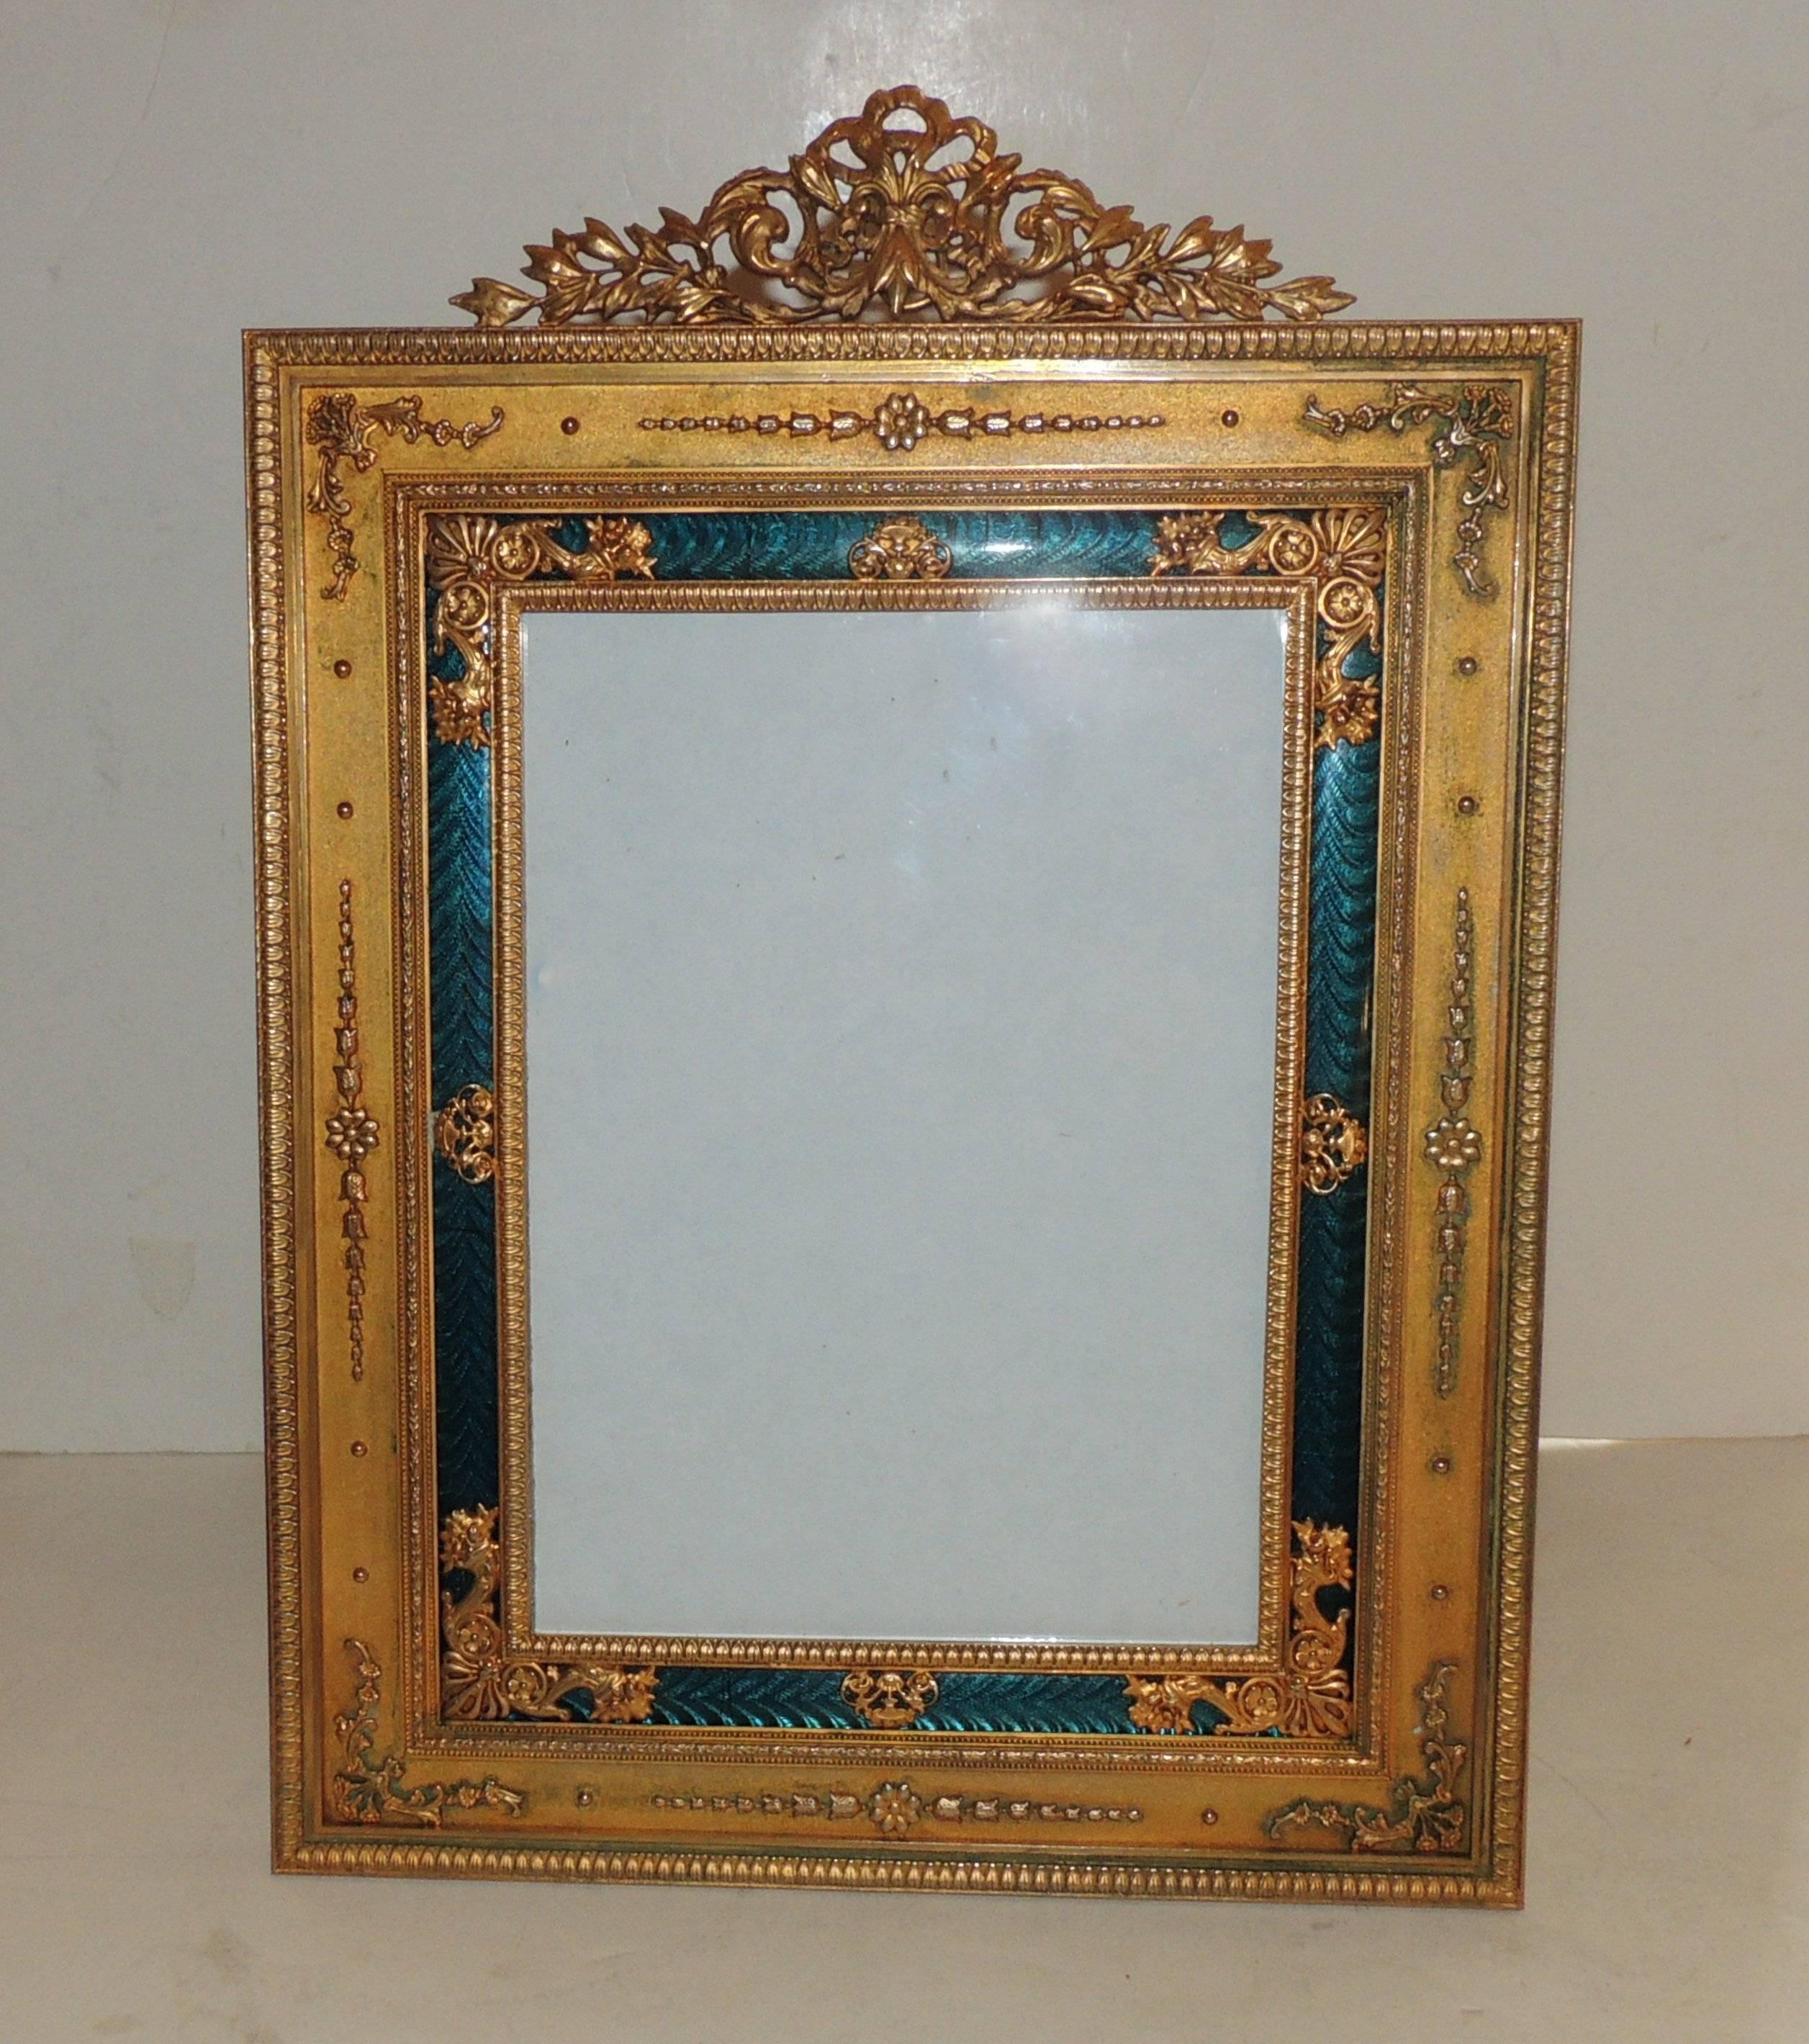 Very finely detailed French empire doré bronze and green enameled frame with original stand.

Measures: 12